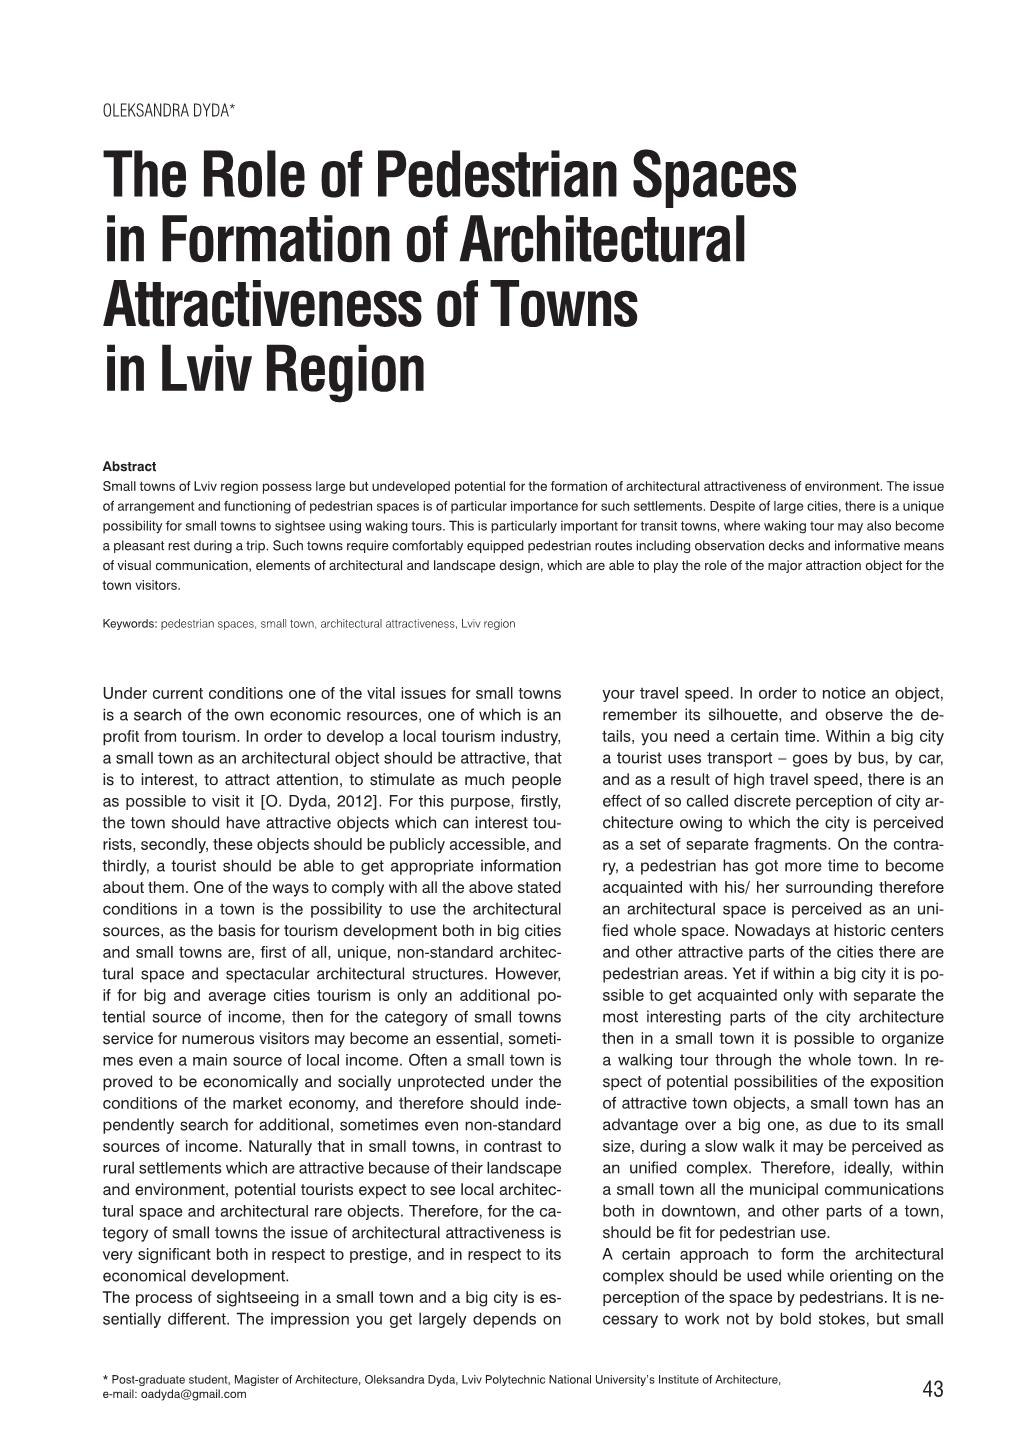 The Role of Pedestrian Spaces in Formation of Architectural Attractiveness of Towns in Lviv Region